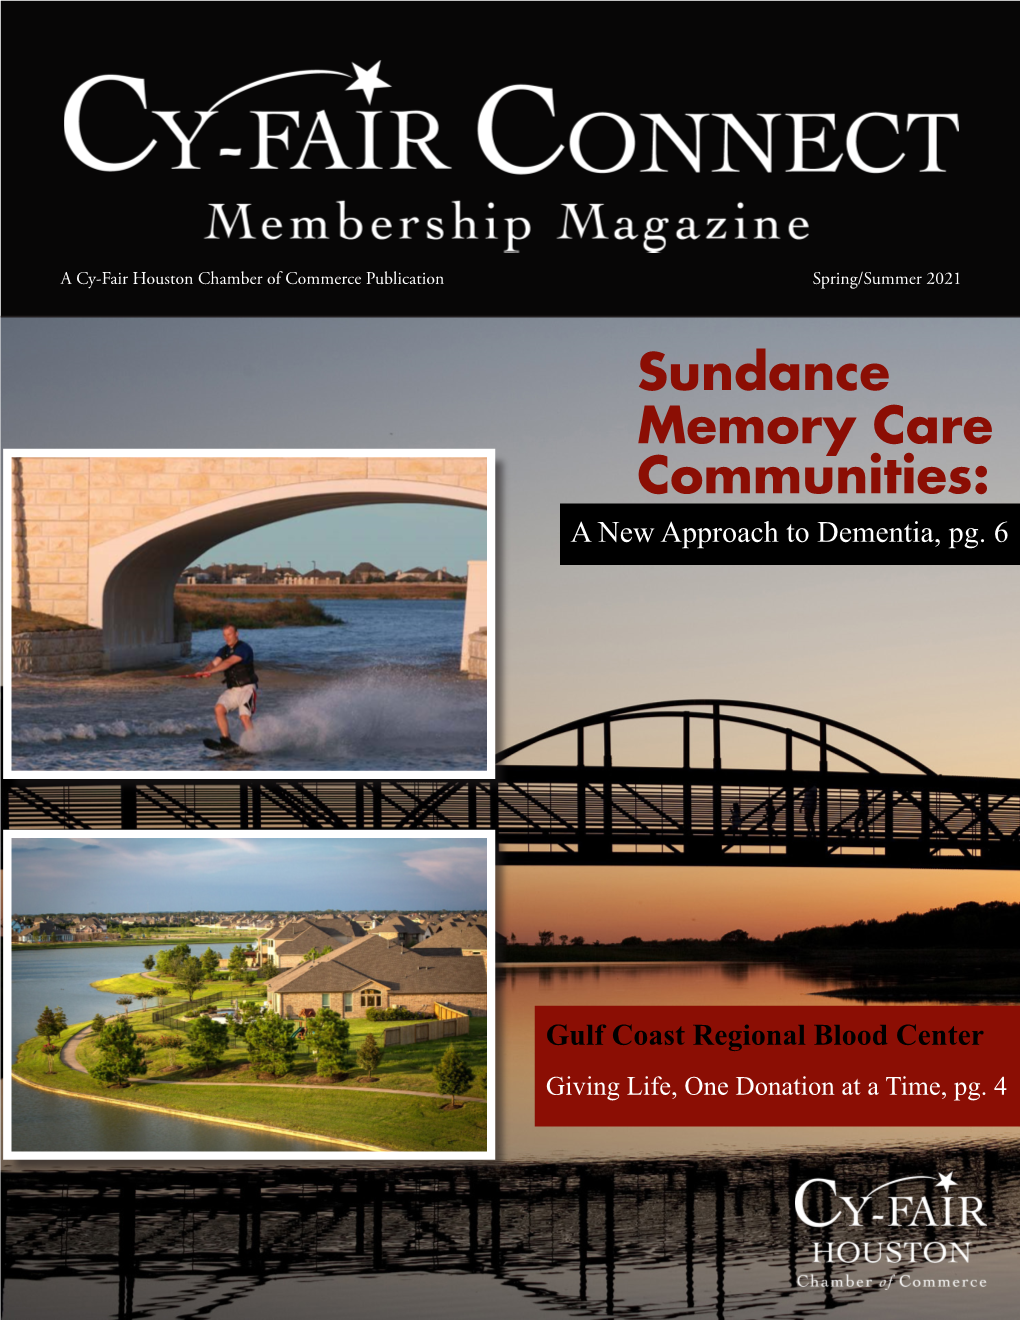 Sundance Memory Care Communities: a New Approach to Dementia, Pg